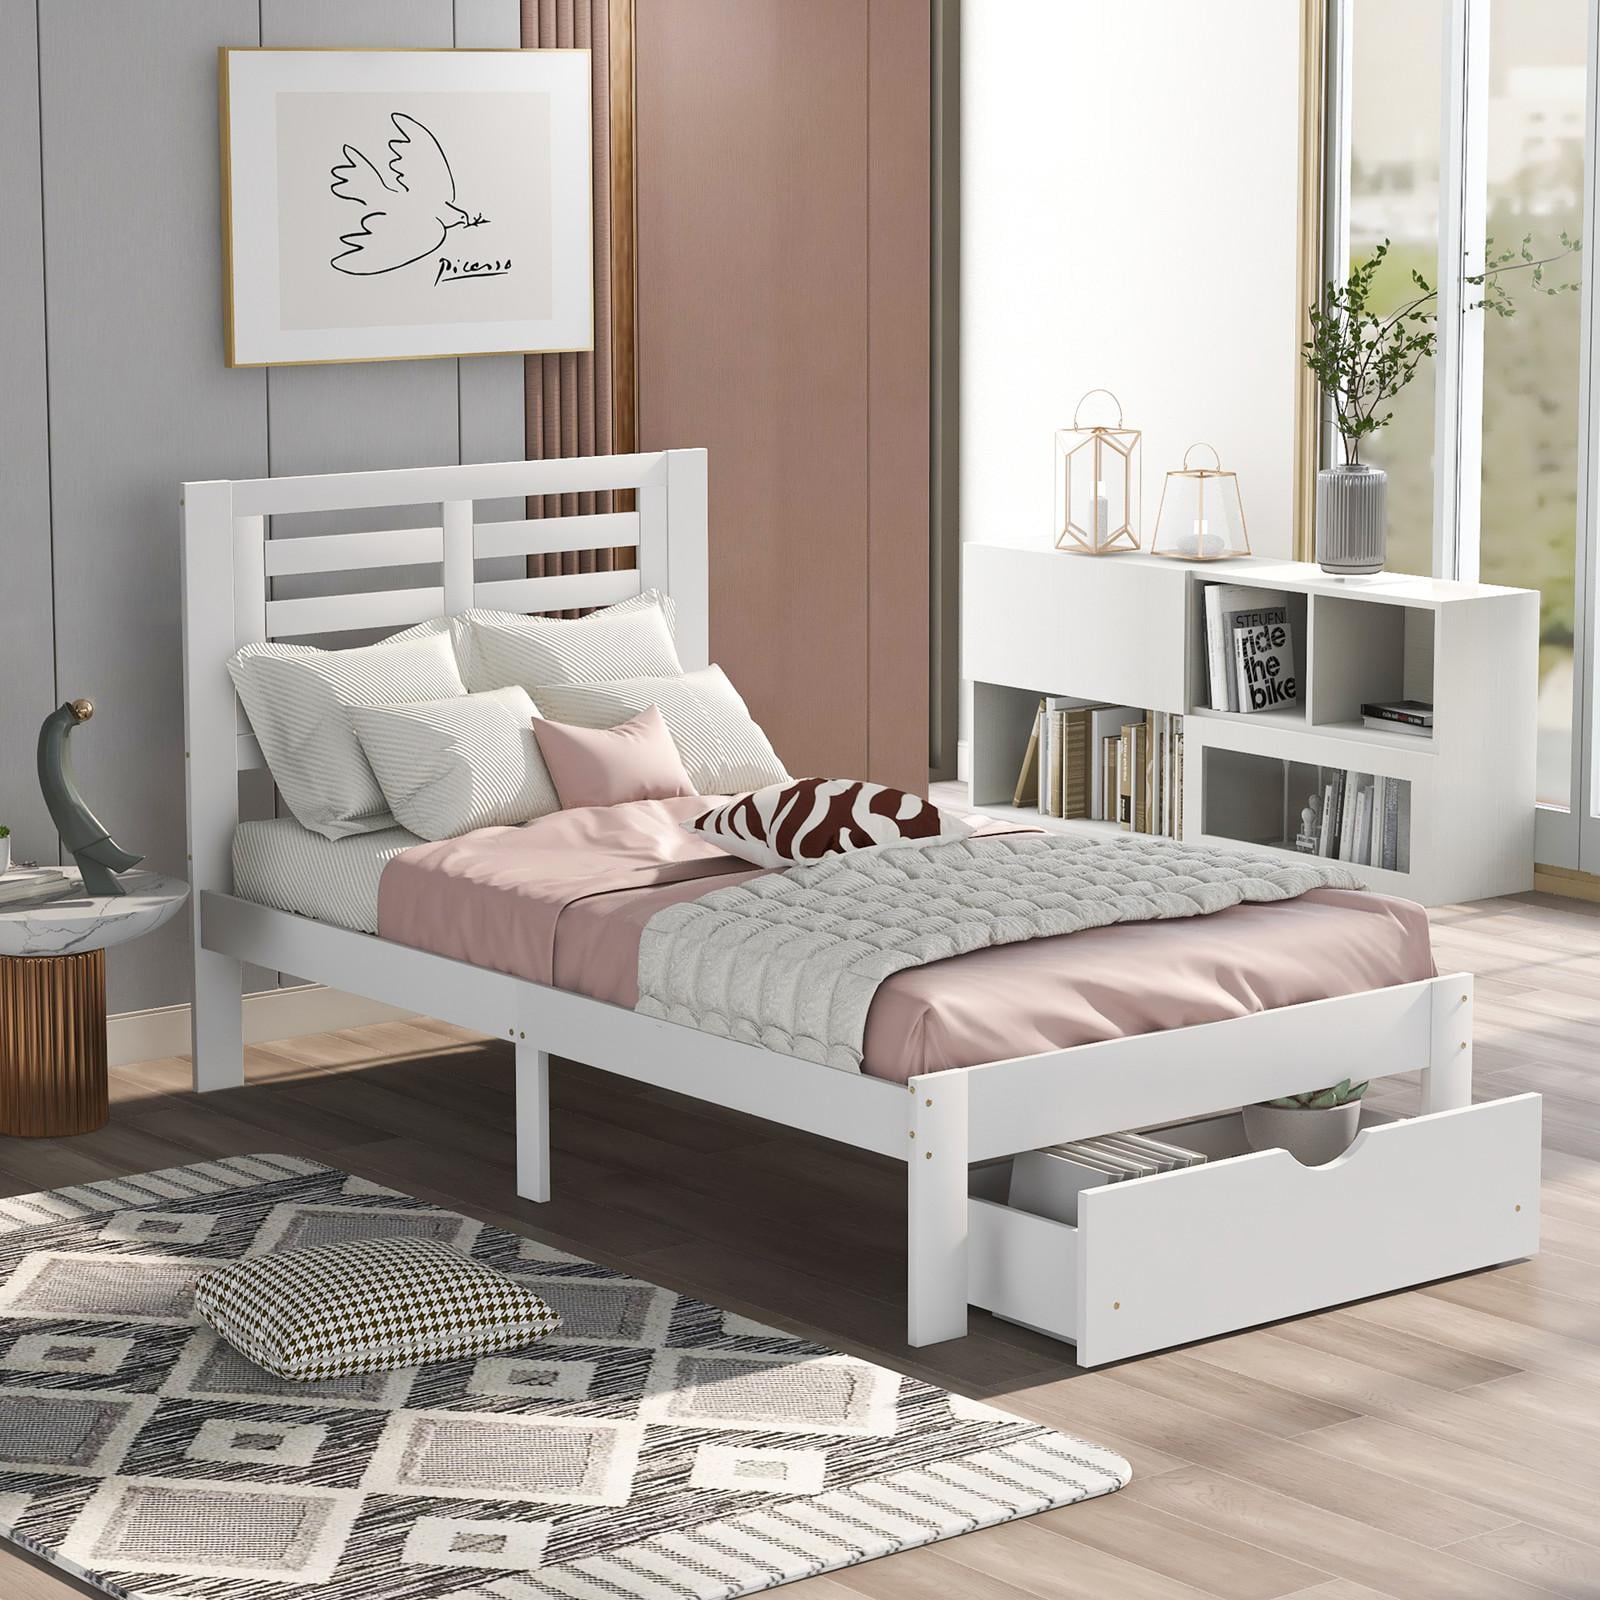 Twin Bed With Under Storage An, Bed With Storage Name